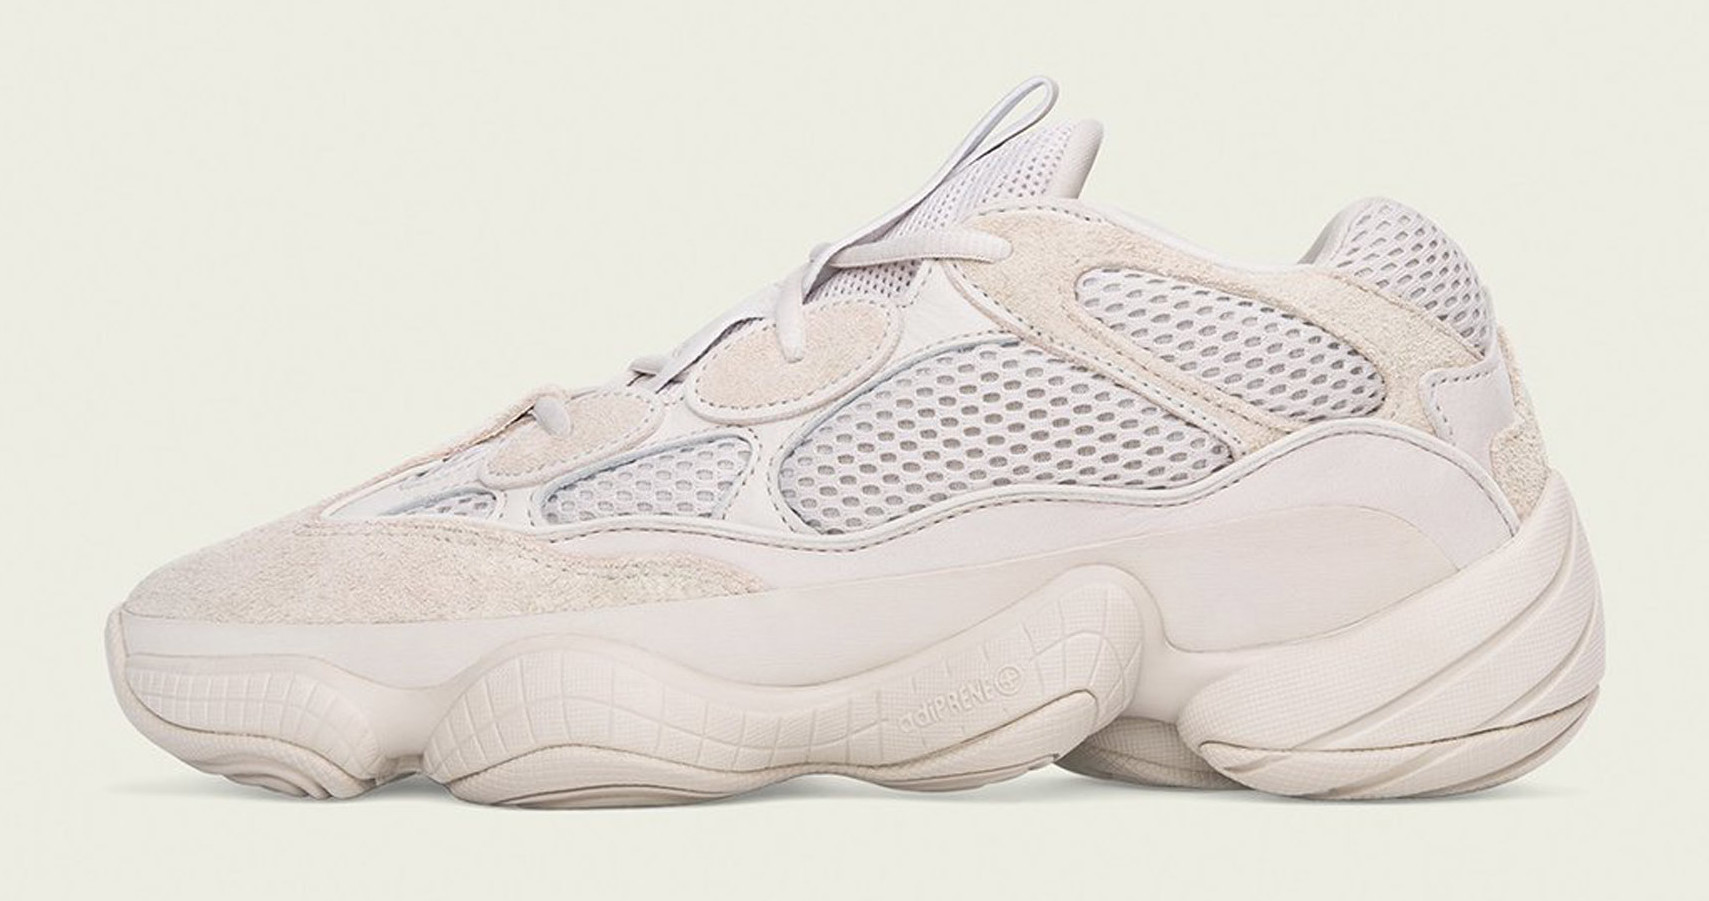 Adidas Yeezy 500 'Blush' DB2908 Global Release Date | Sole Collector